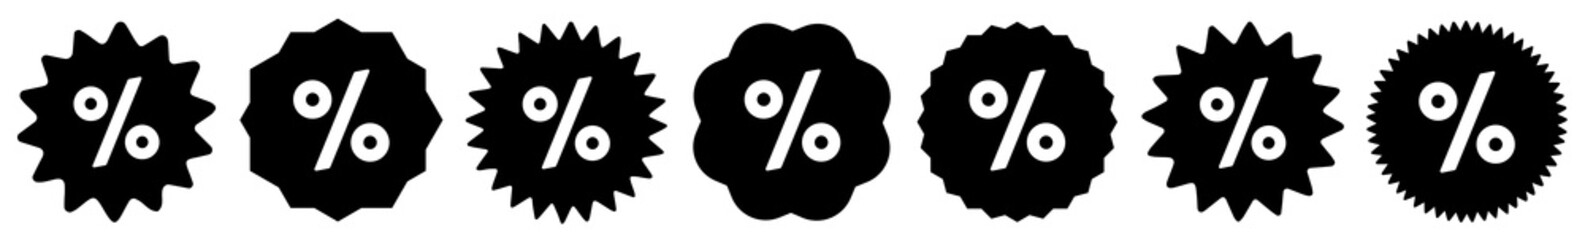 Percent OFF Discount Tag Black | Special Offer Icon | Sale Sticker | Deal Label | Variations